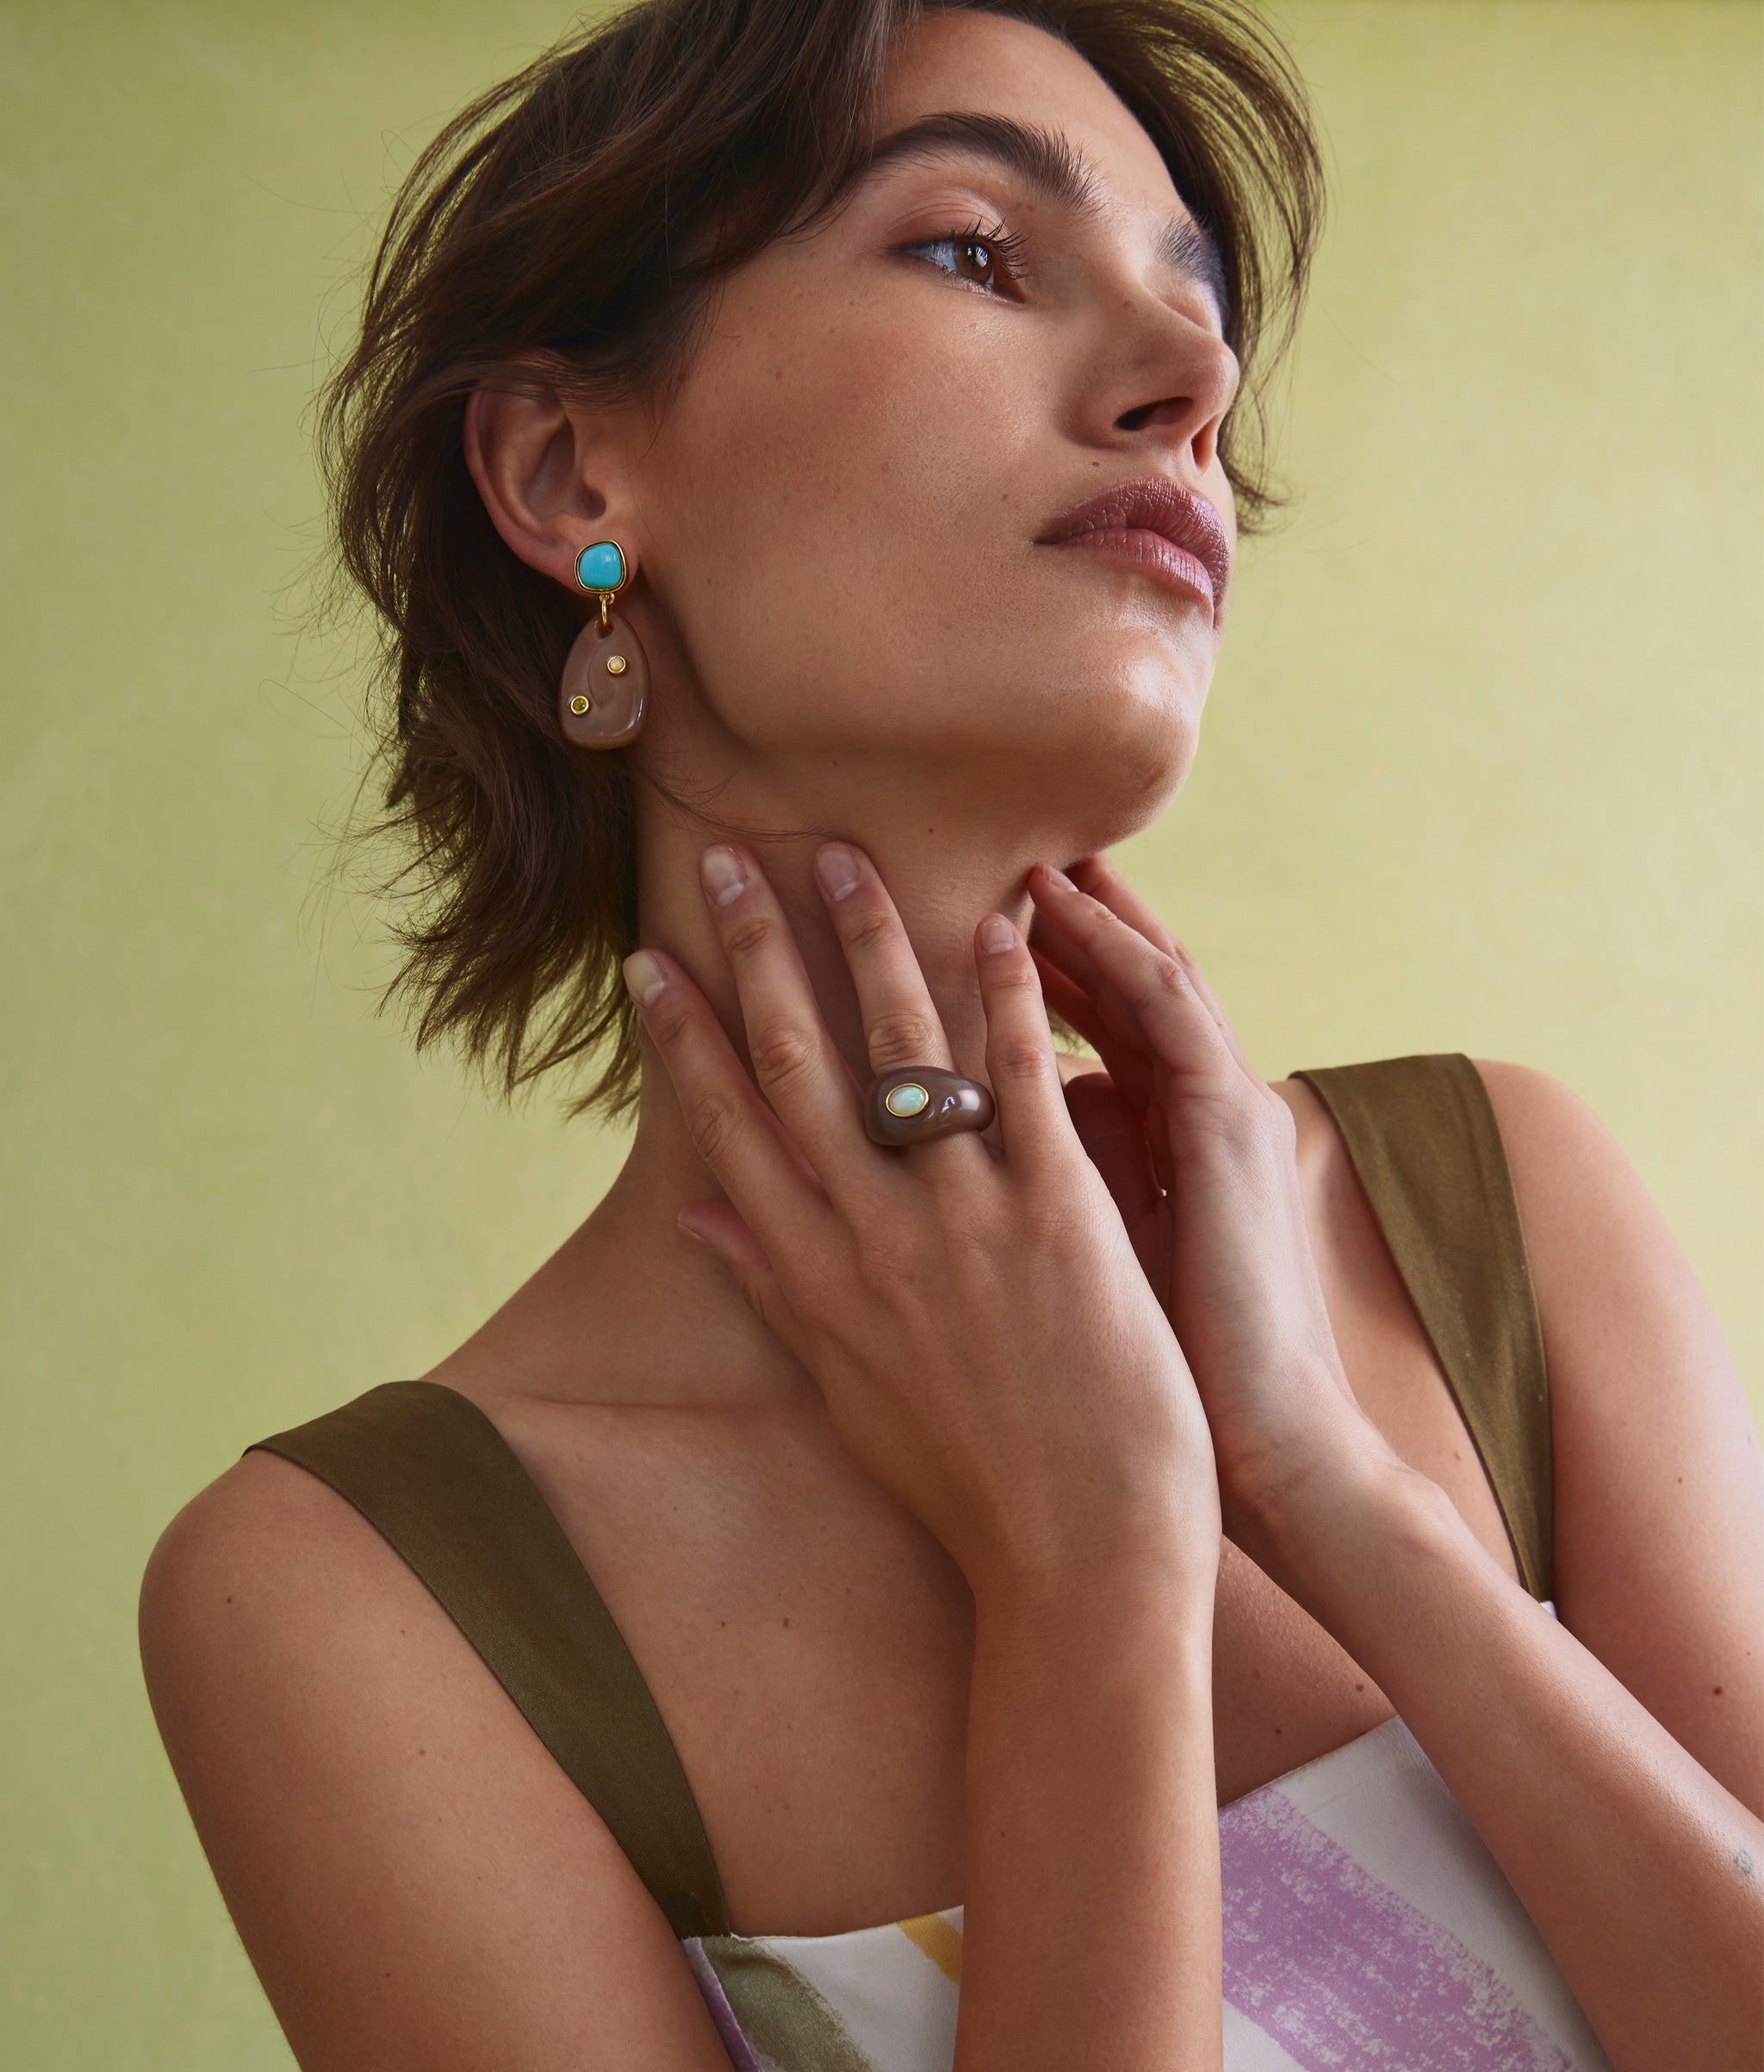 Model on green backdrop with hands on neck wears Monument Ring in Sandstone and Sandstone Earrings.